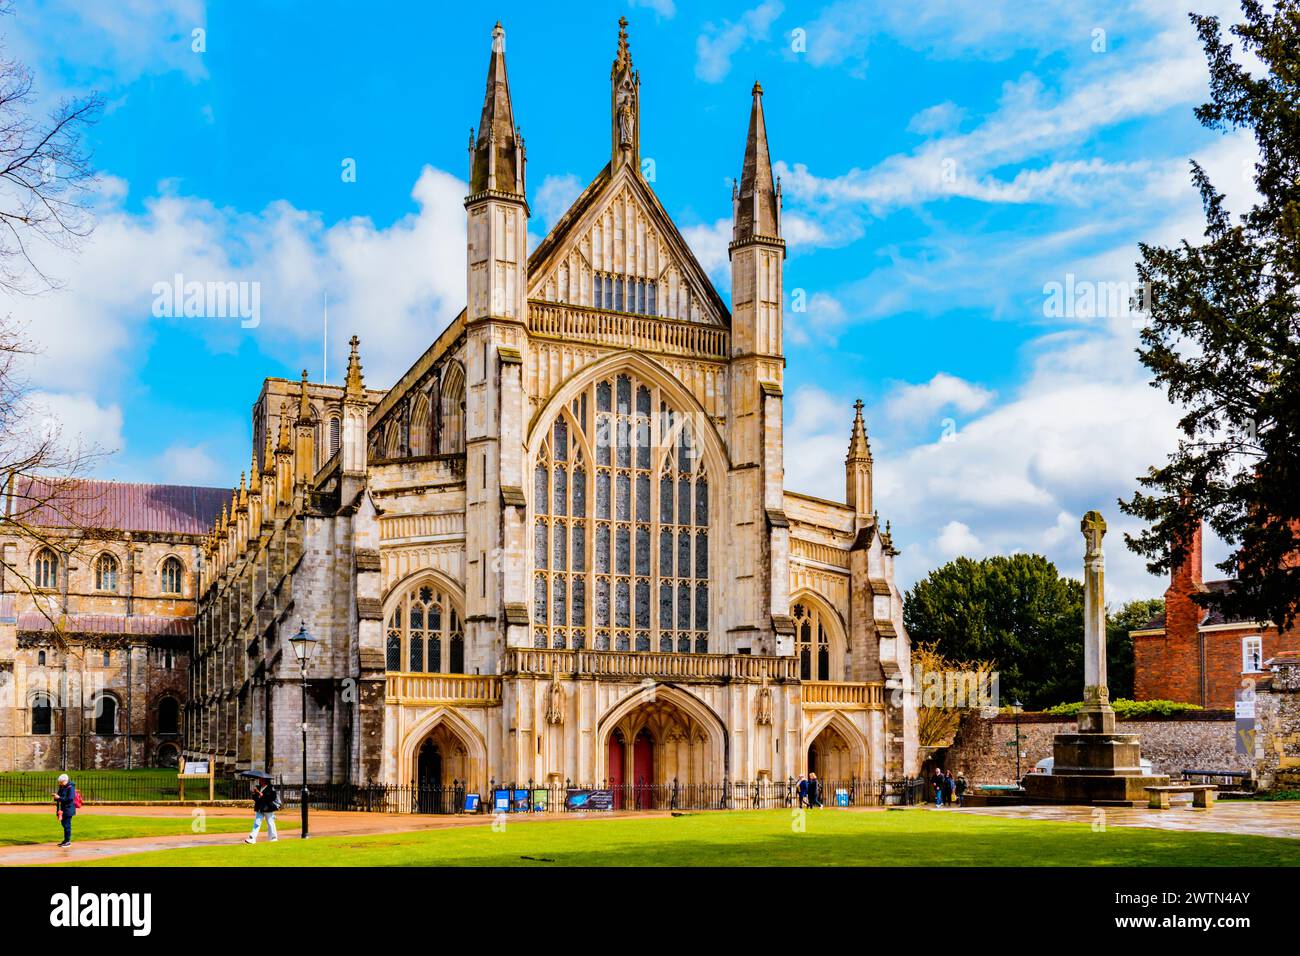 The Cathedral Church of the Holy Trinity, Saint Peter, Saint Paul and Saint Swithun, commonly known as Winchester Cathedral, is the cathedral of the c Stock Photo